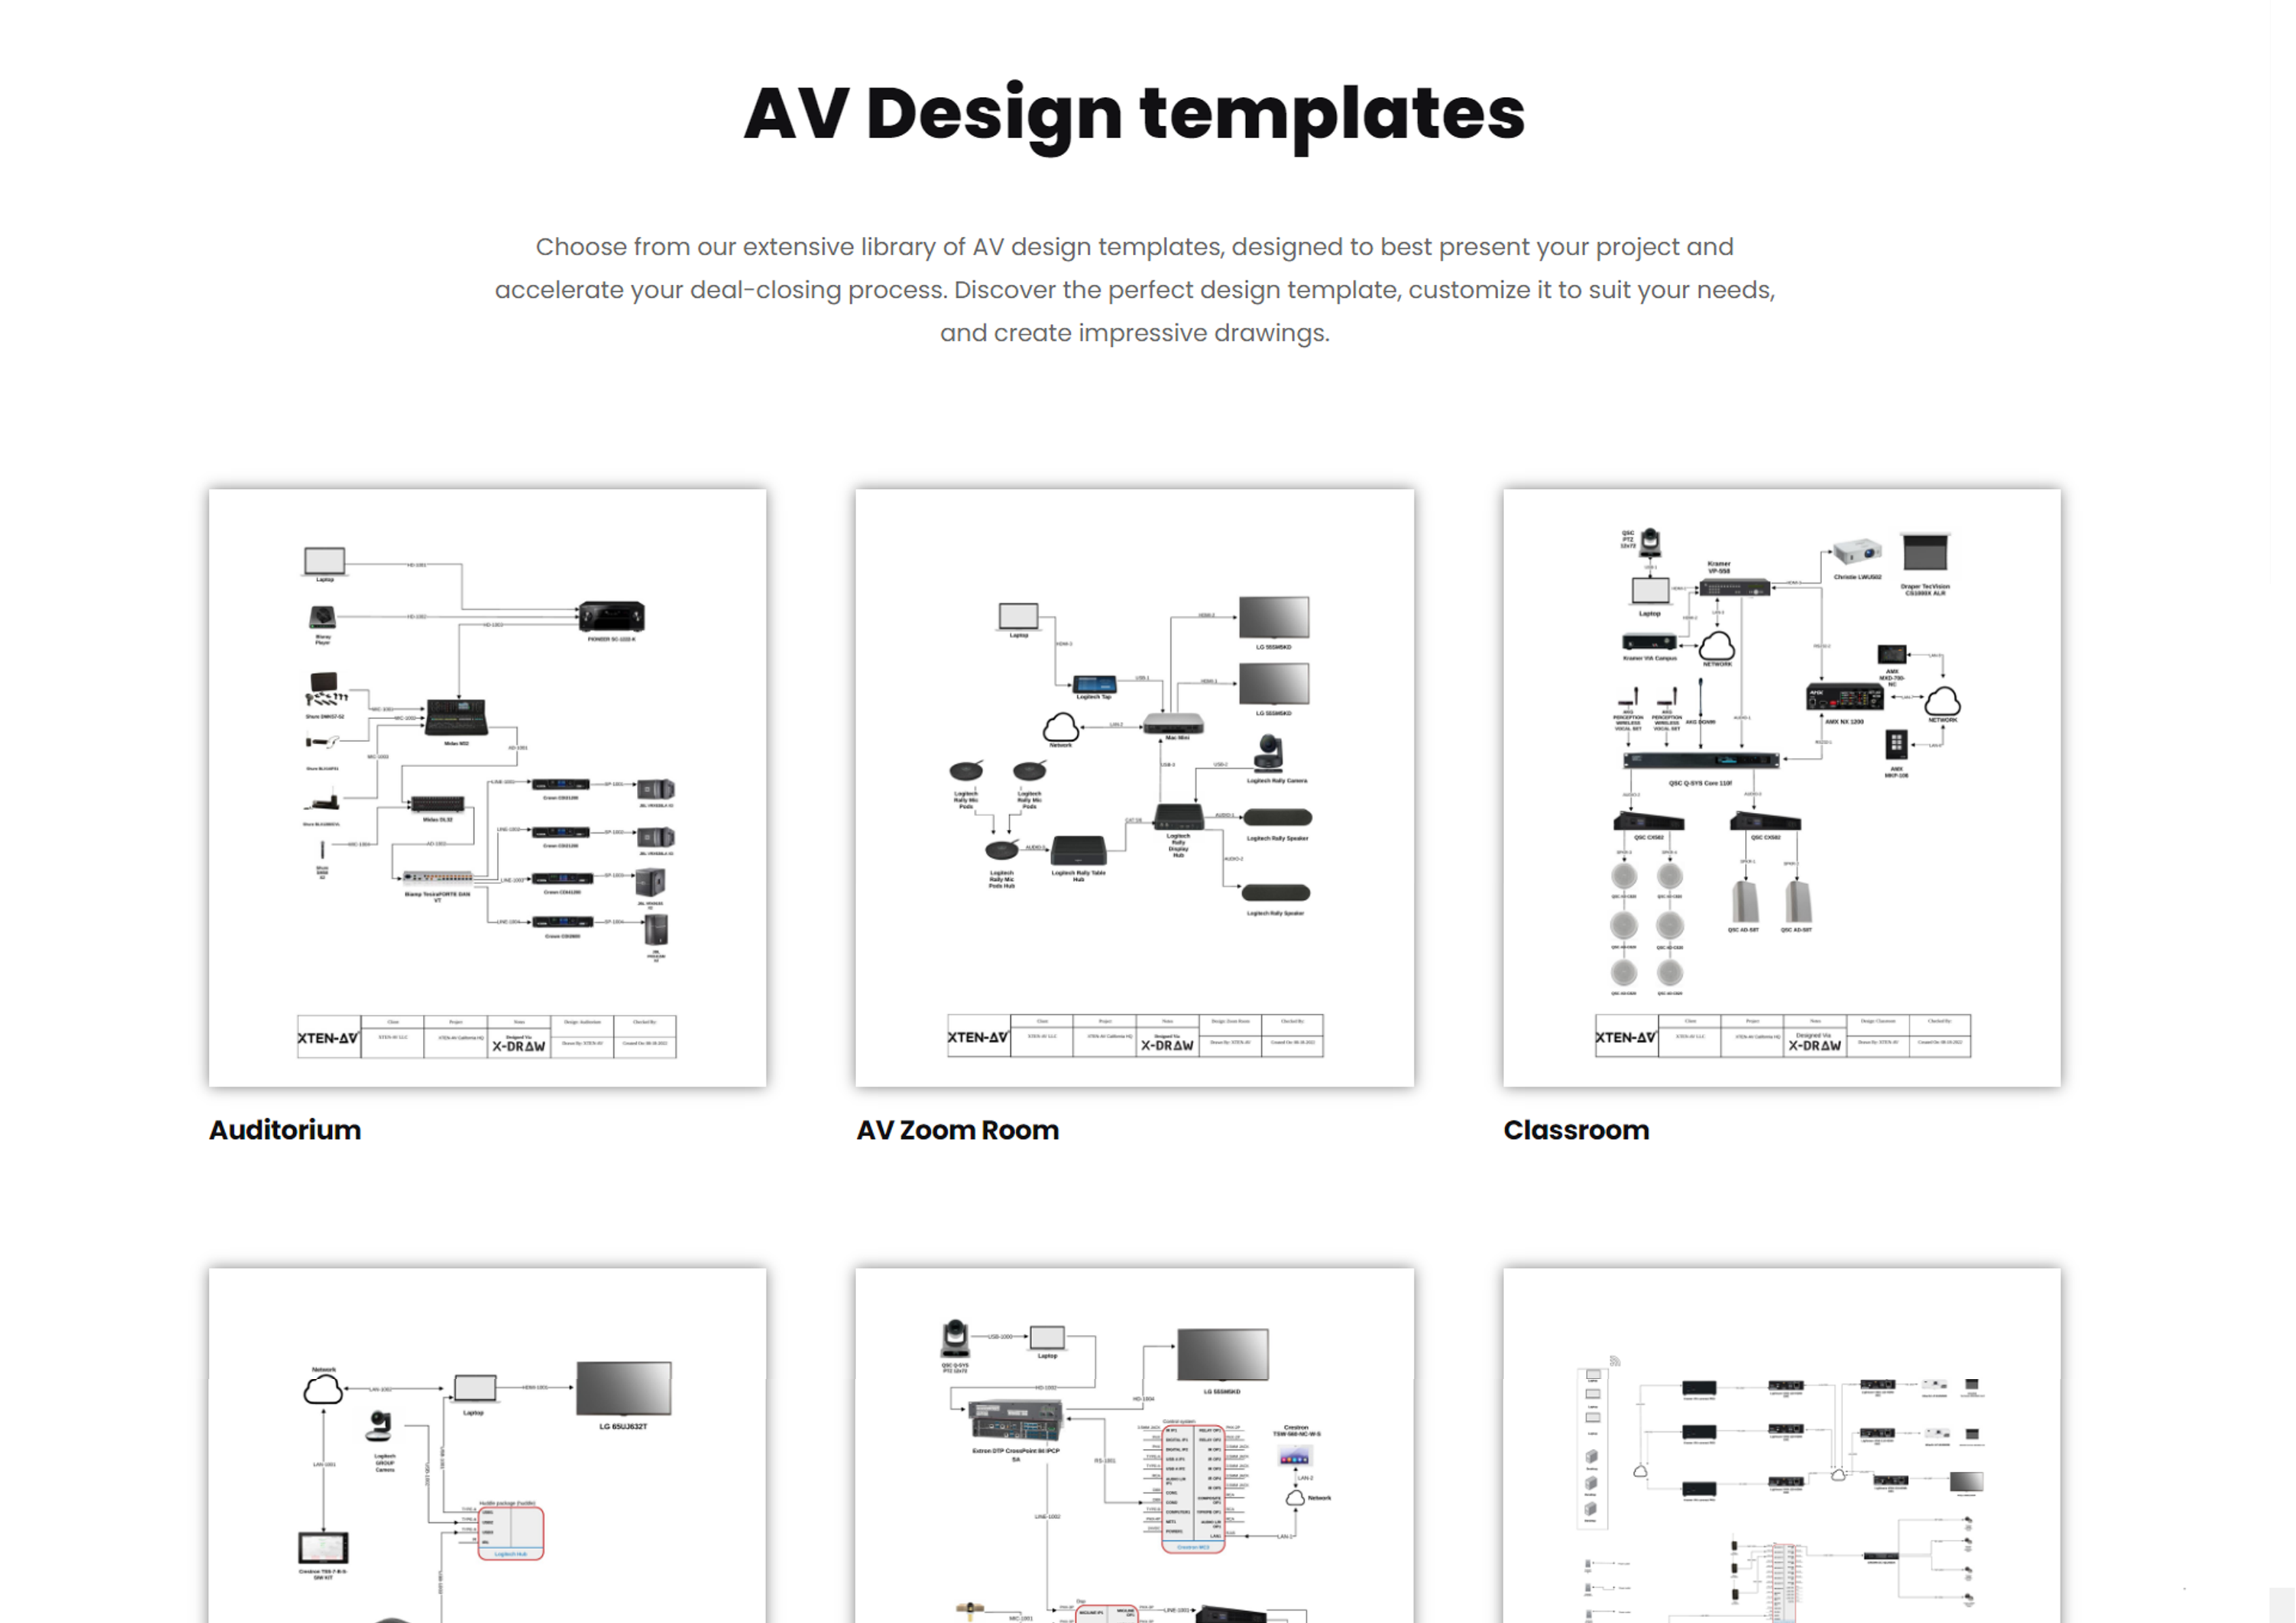 Choose from a range of AV Design Templates; get ready BOM, Drawings and Proposals